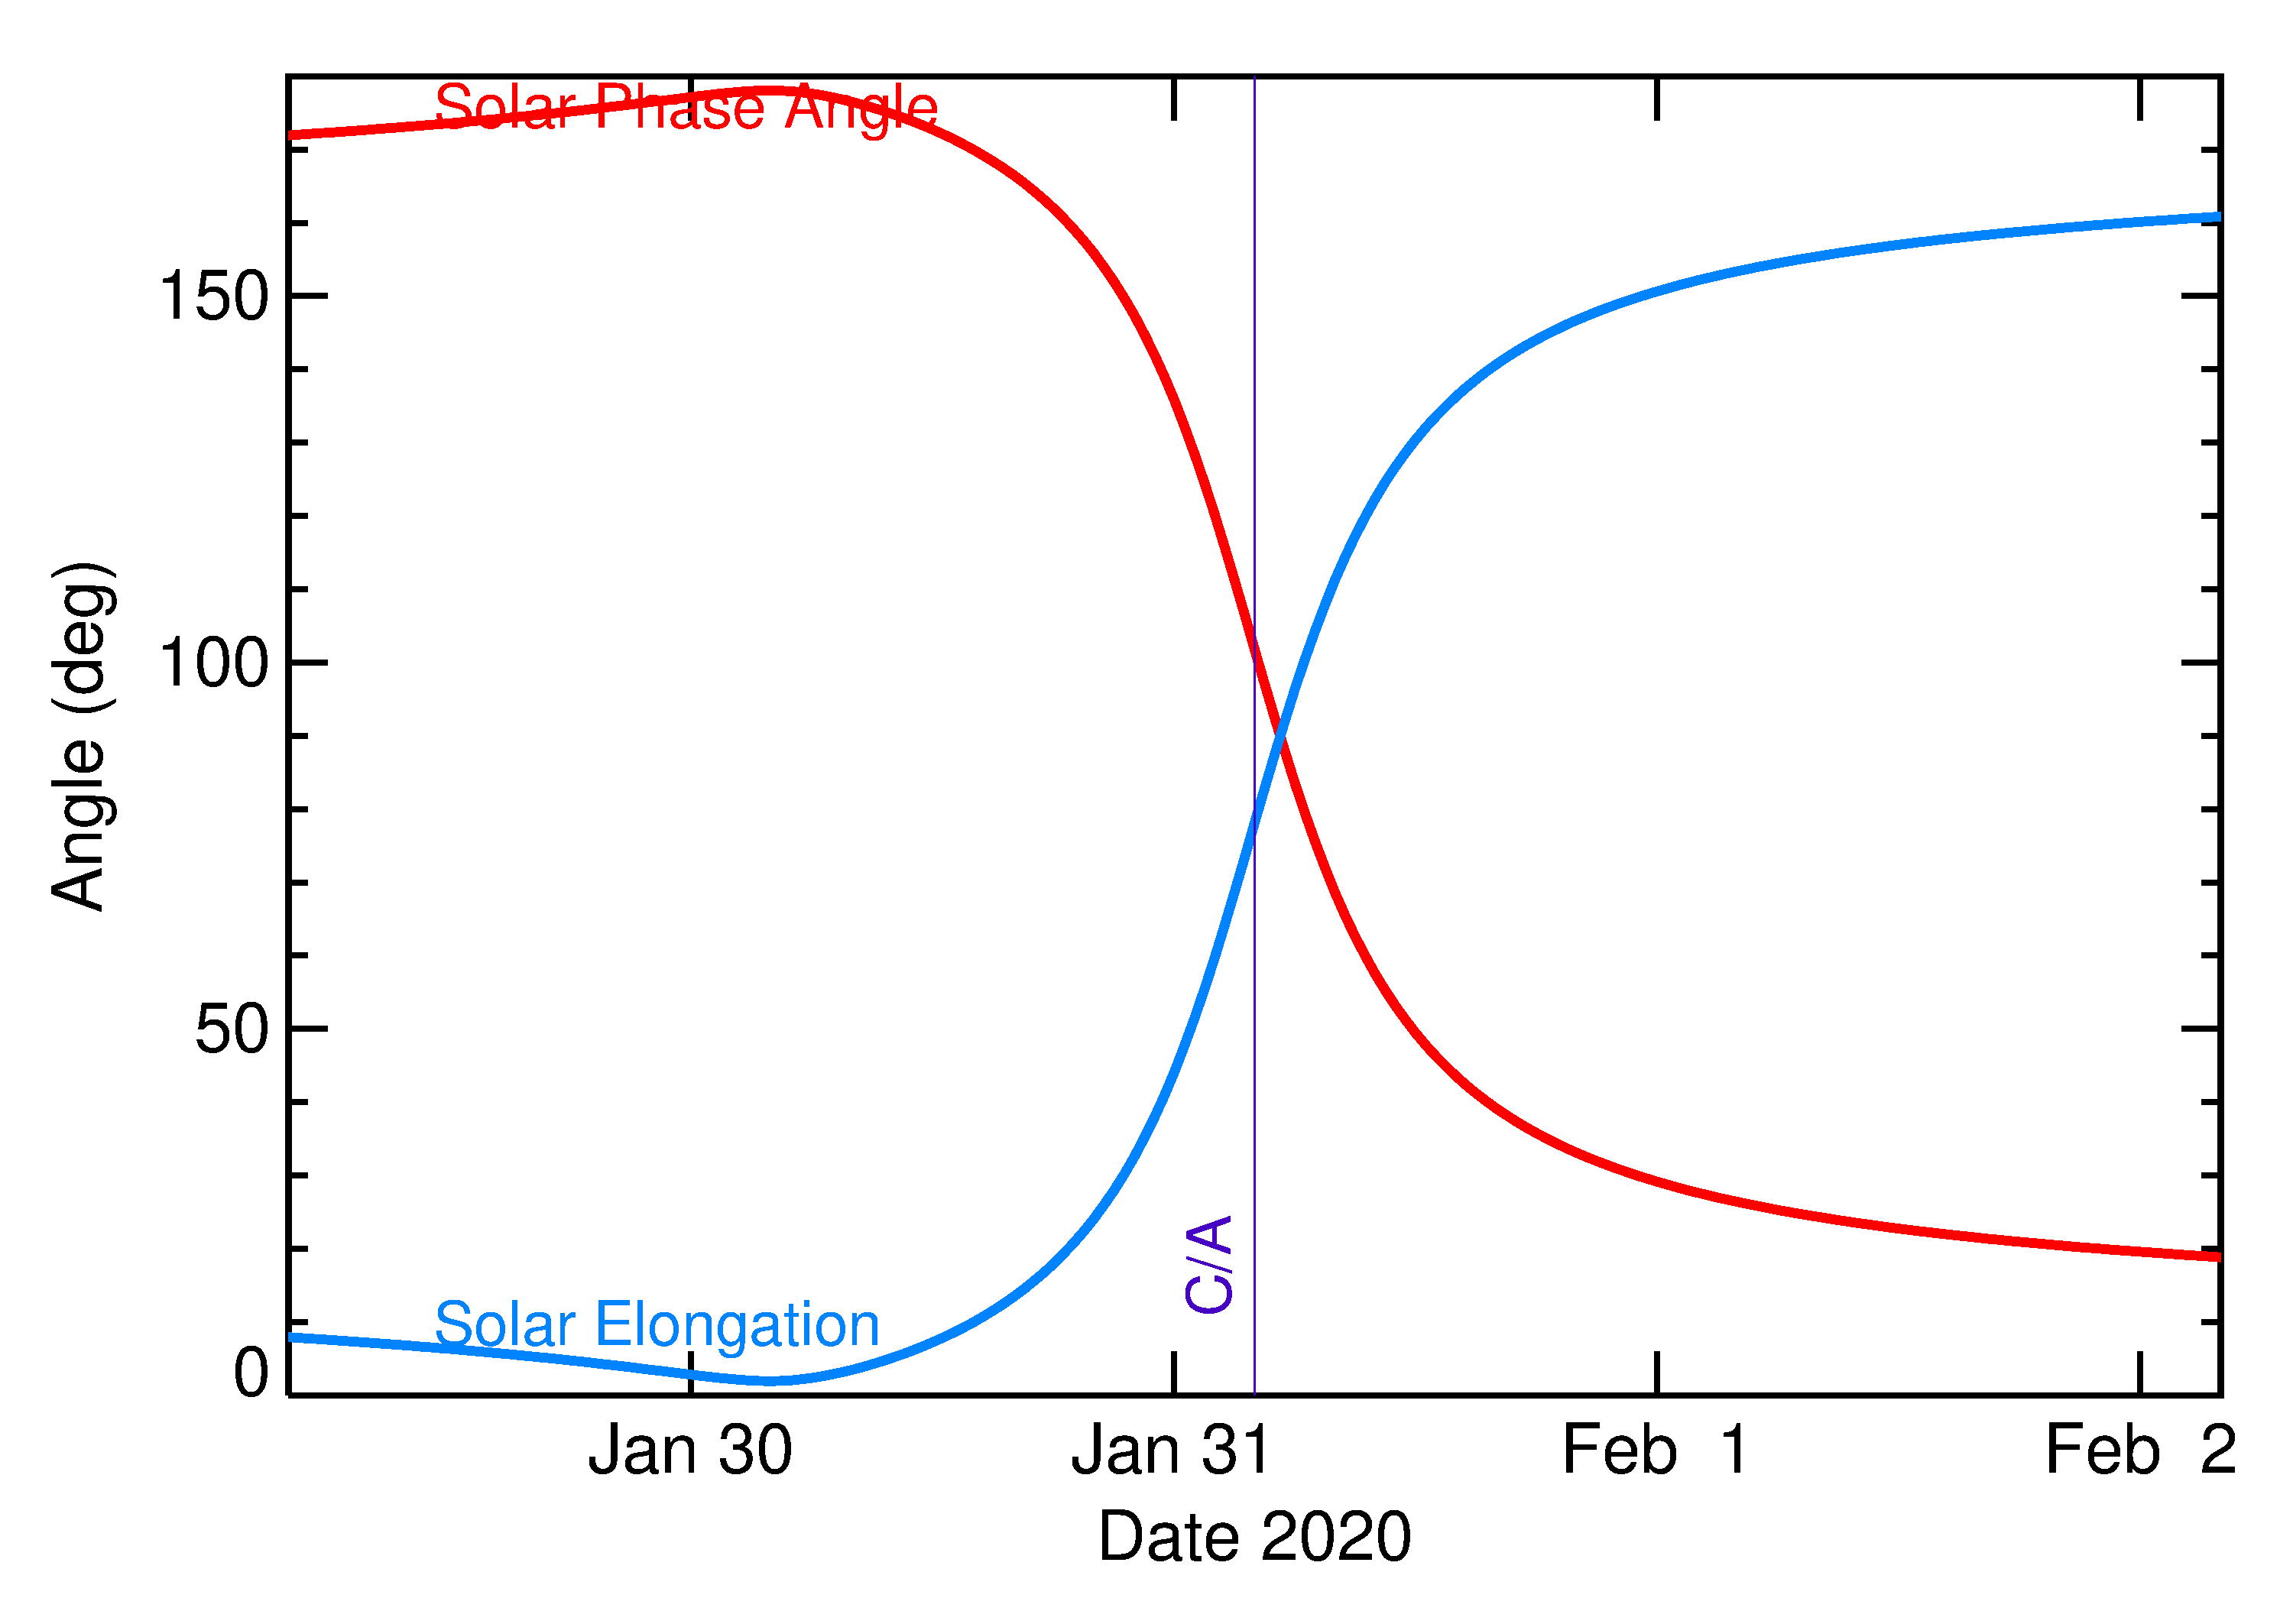 Solar Elongation and Solar Phase Angle of 2020 CZ in the days around closest approach